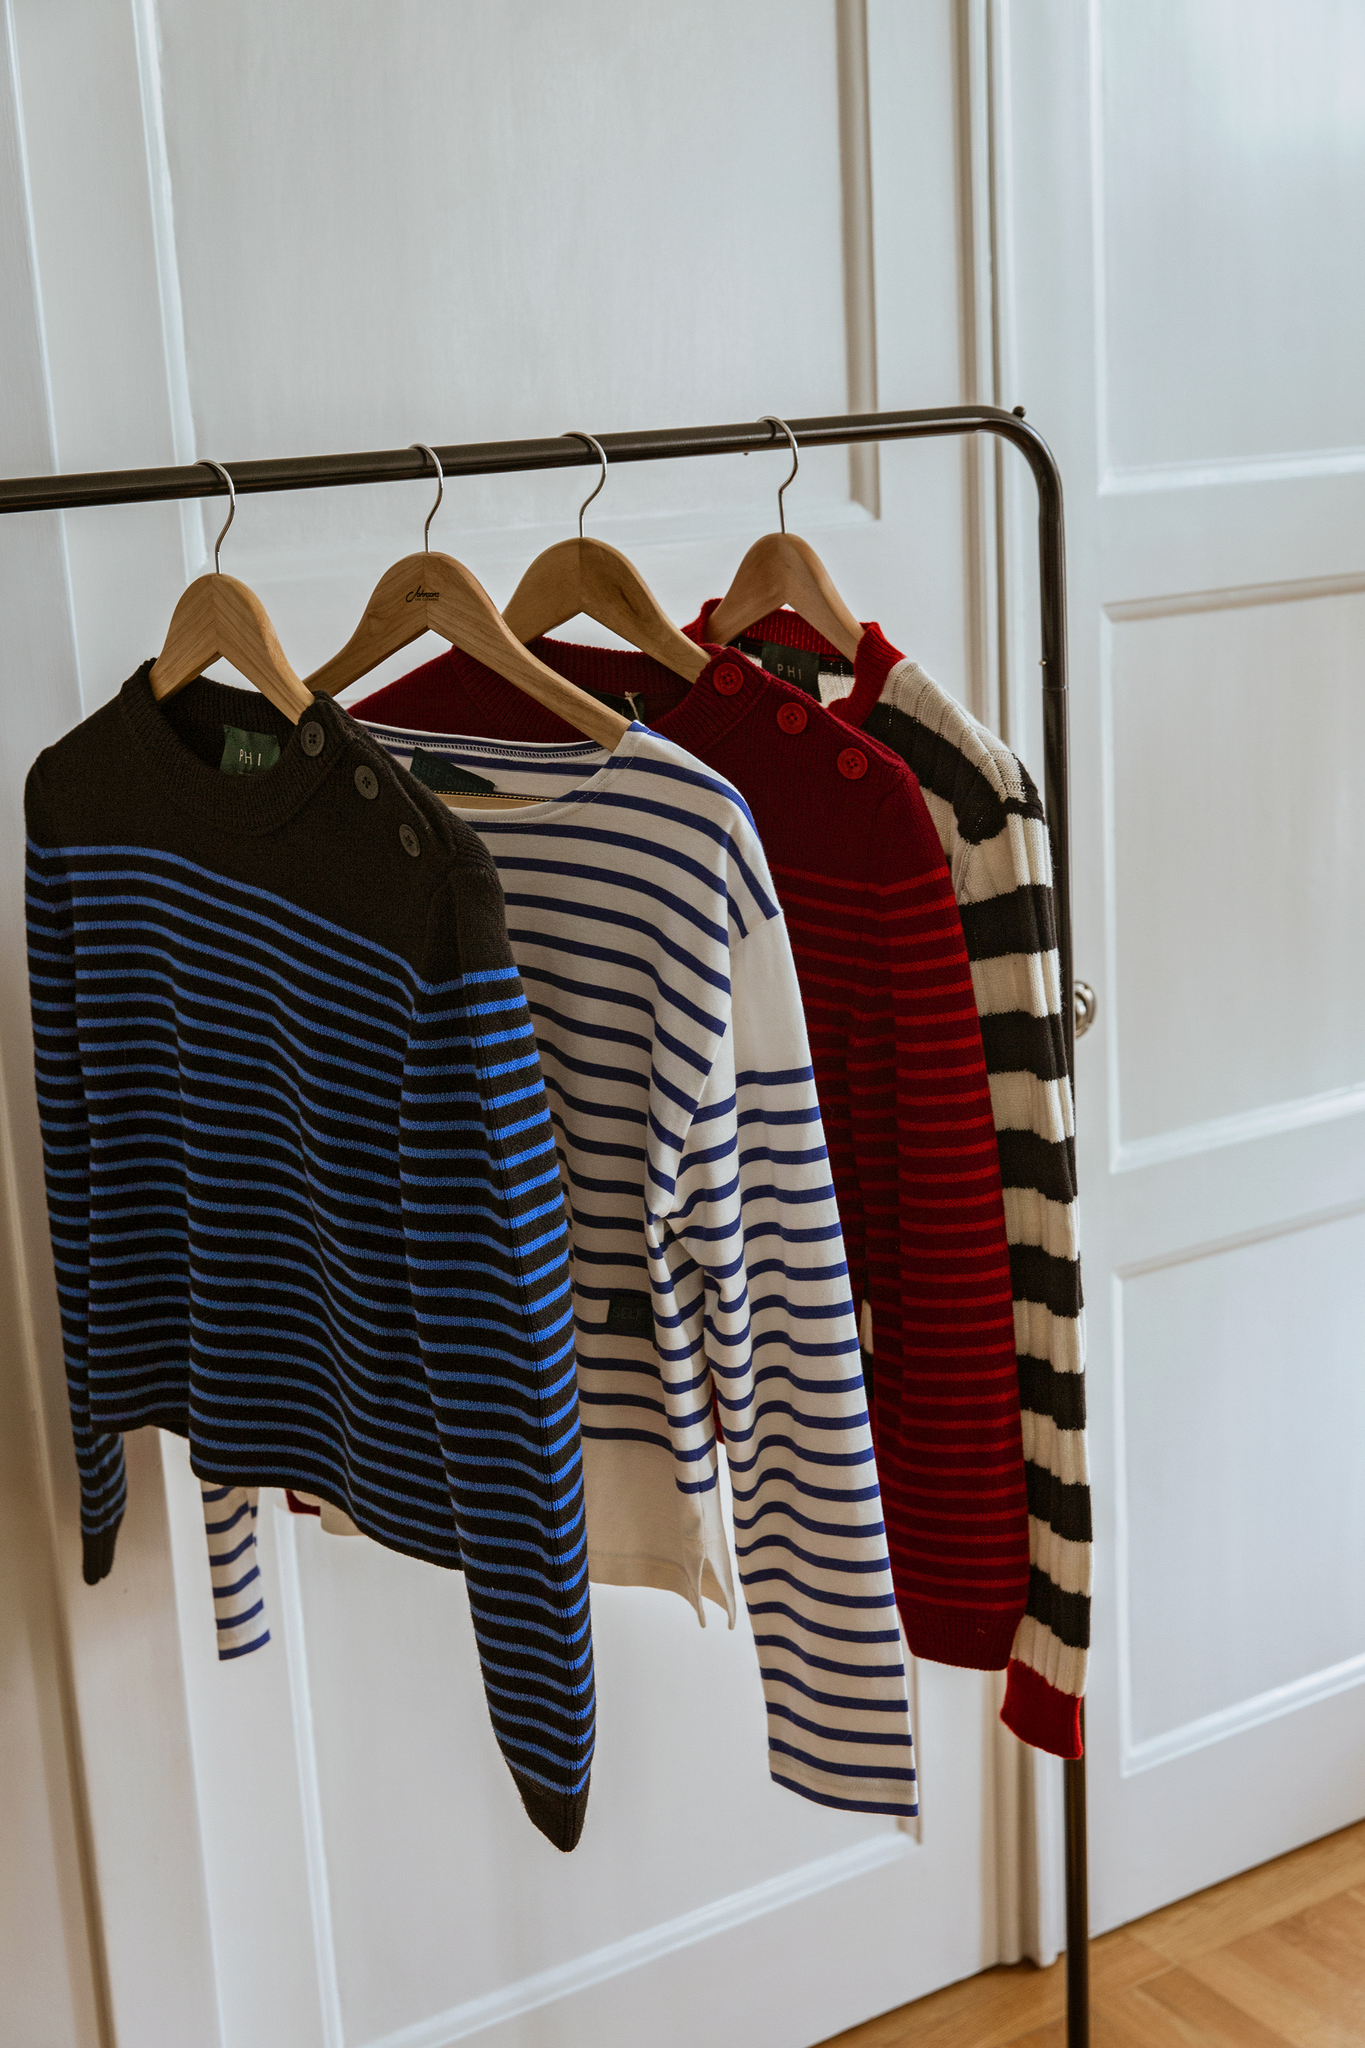 Rack with Sustainable Knitwear with stripes